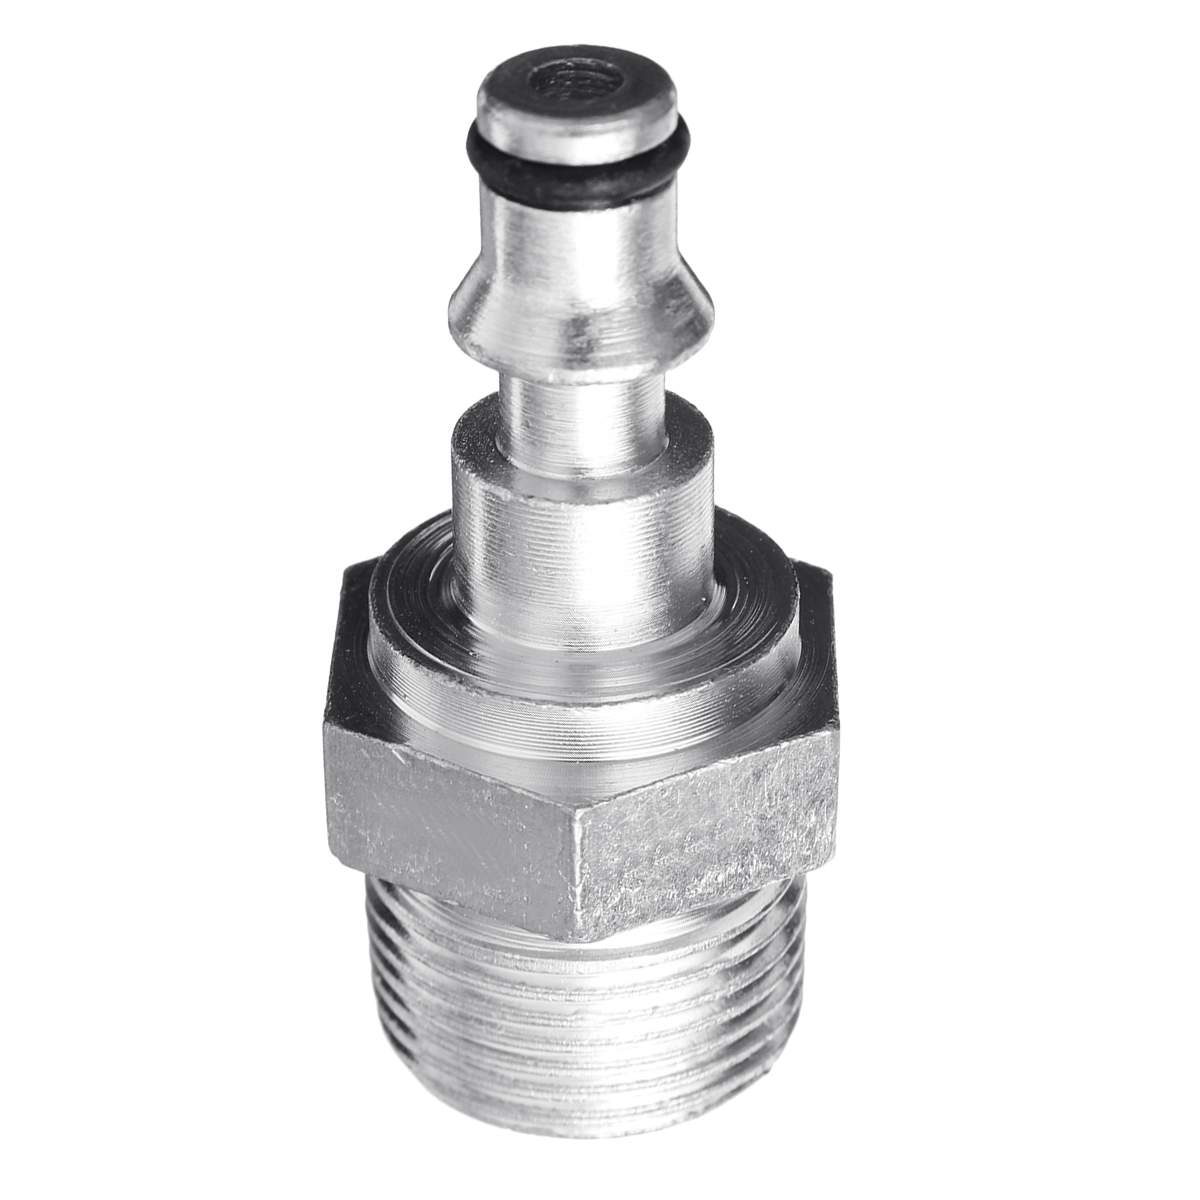 Quick-Connection-Pressure-Washer-Gun-Hose-Fitting-To-M22-Adapter-For-Lavor-VAX-1299224-2